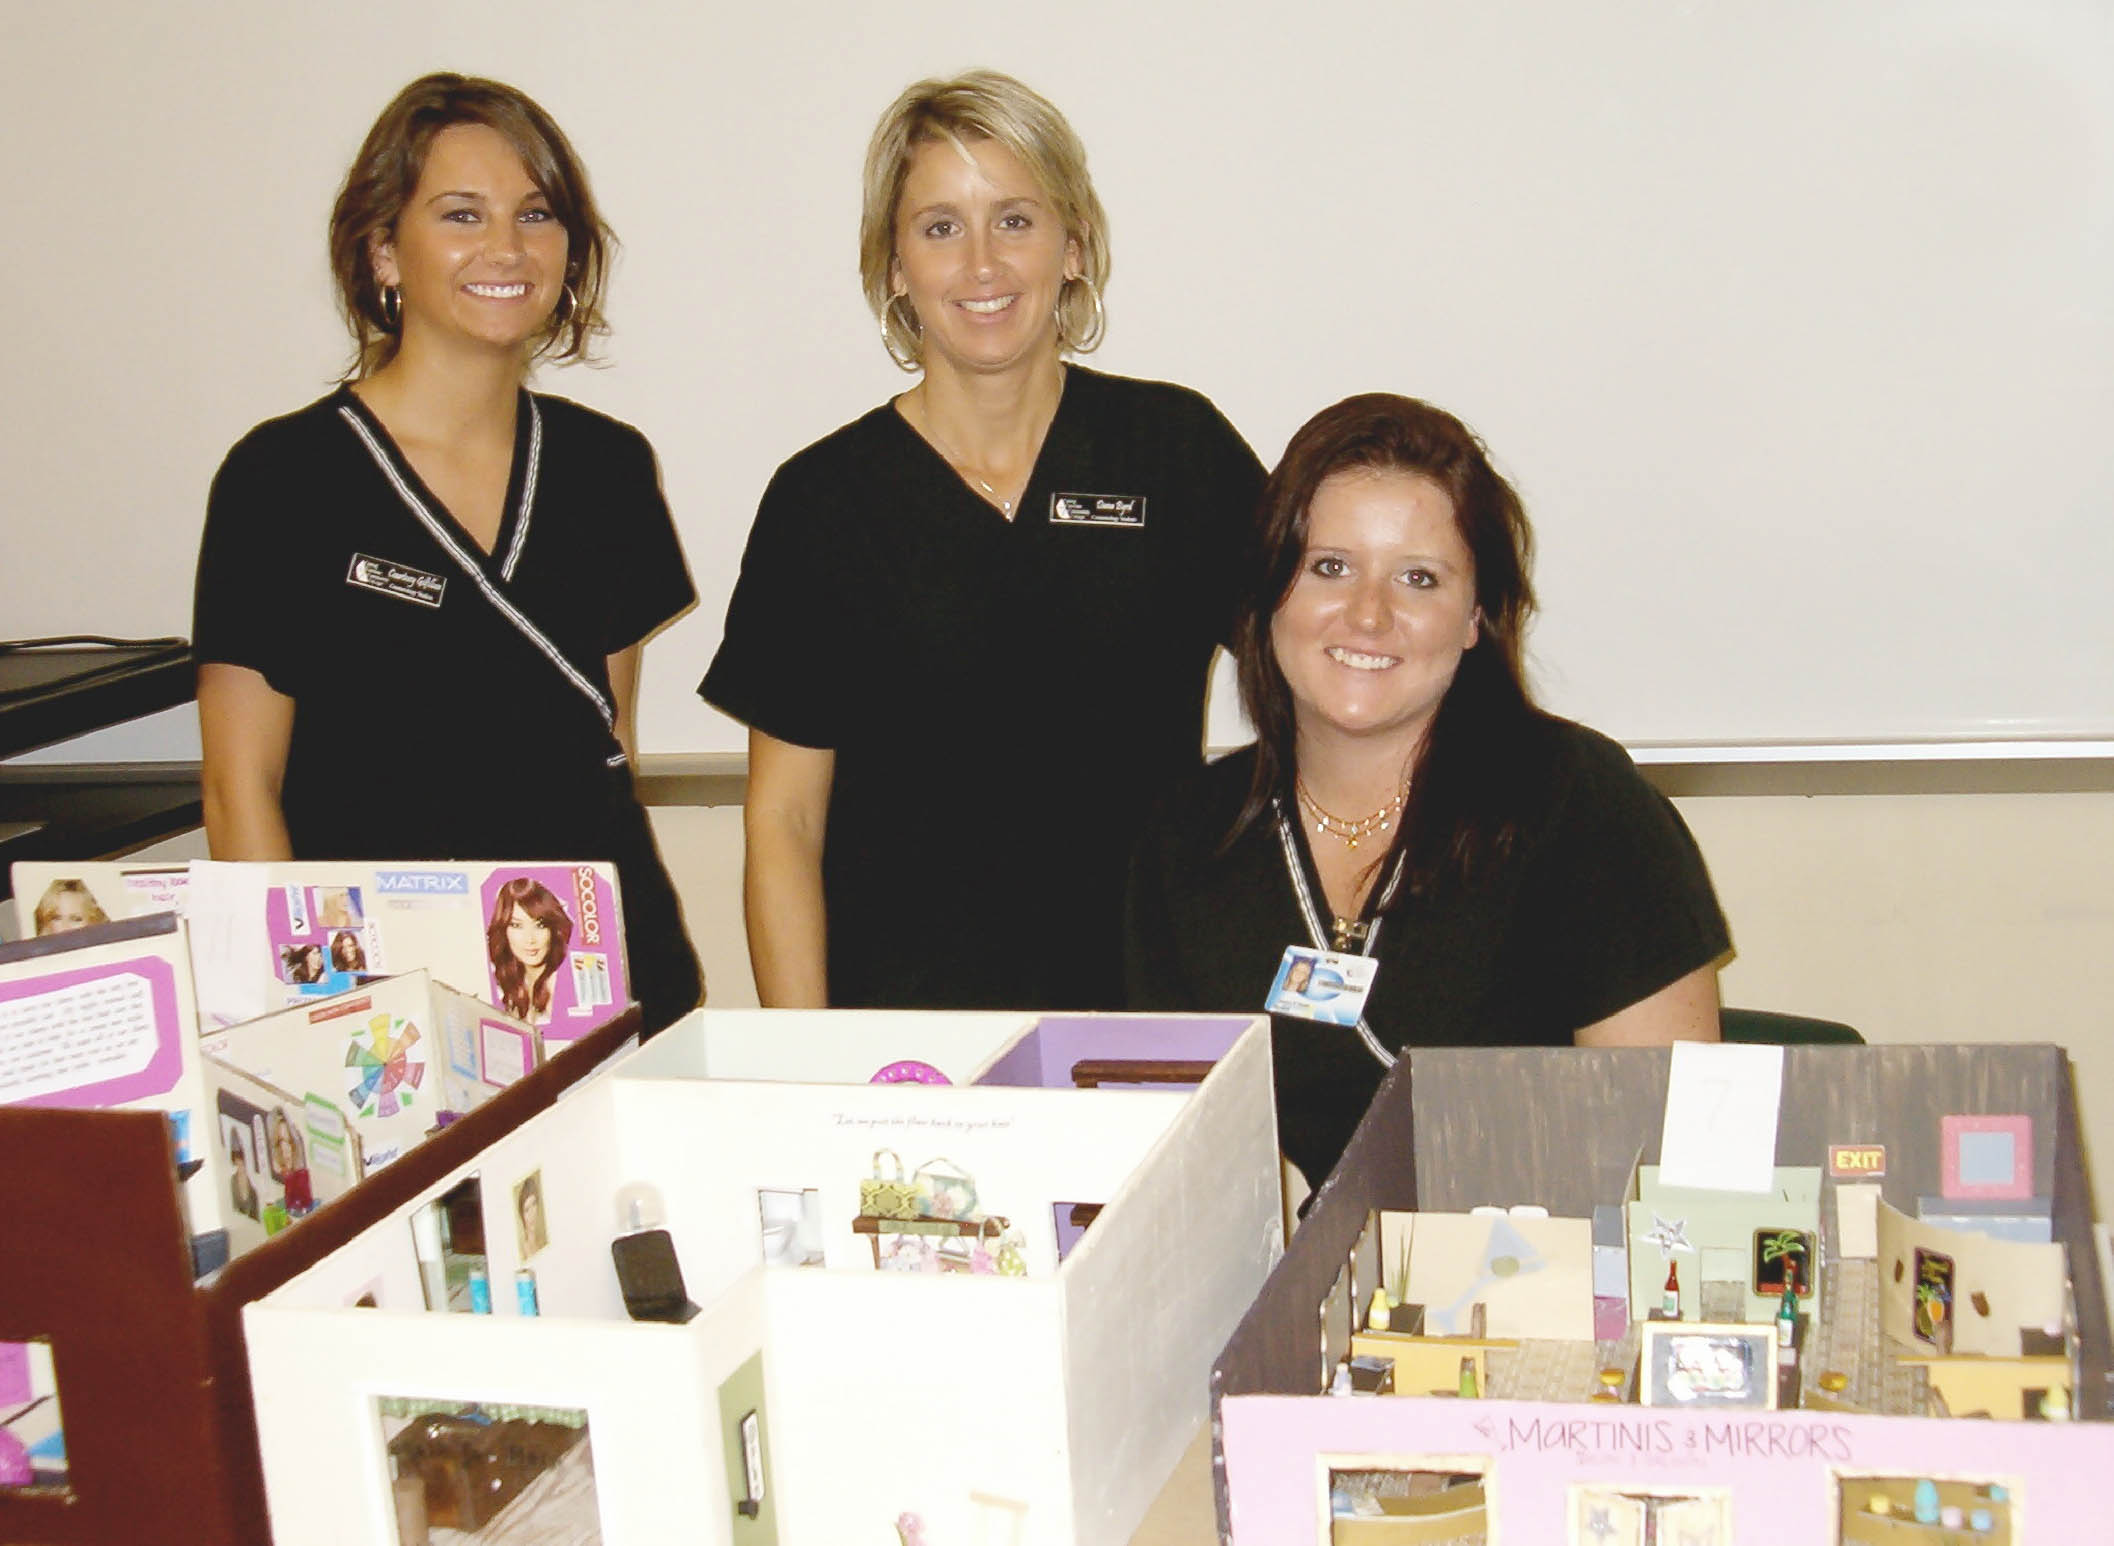 Read the full story, Cosmetology students design winning salons